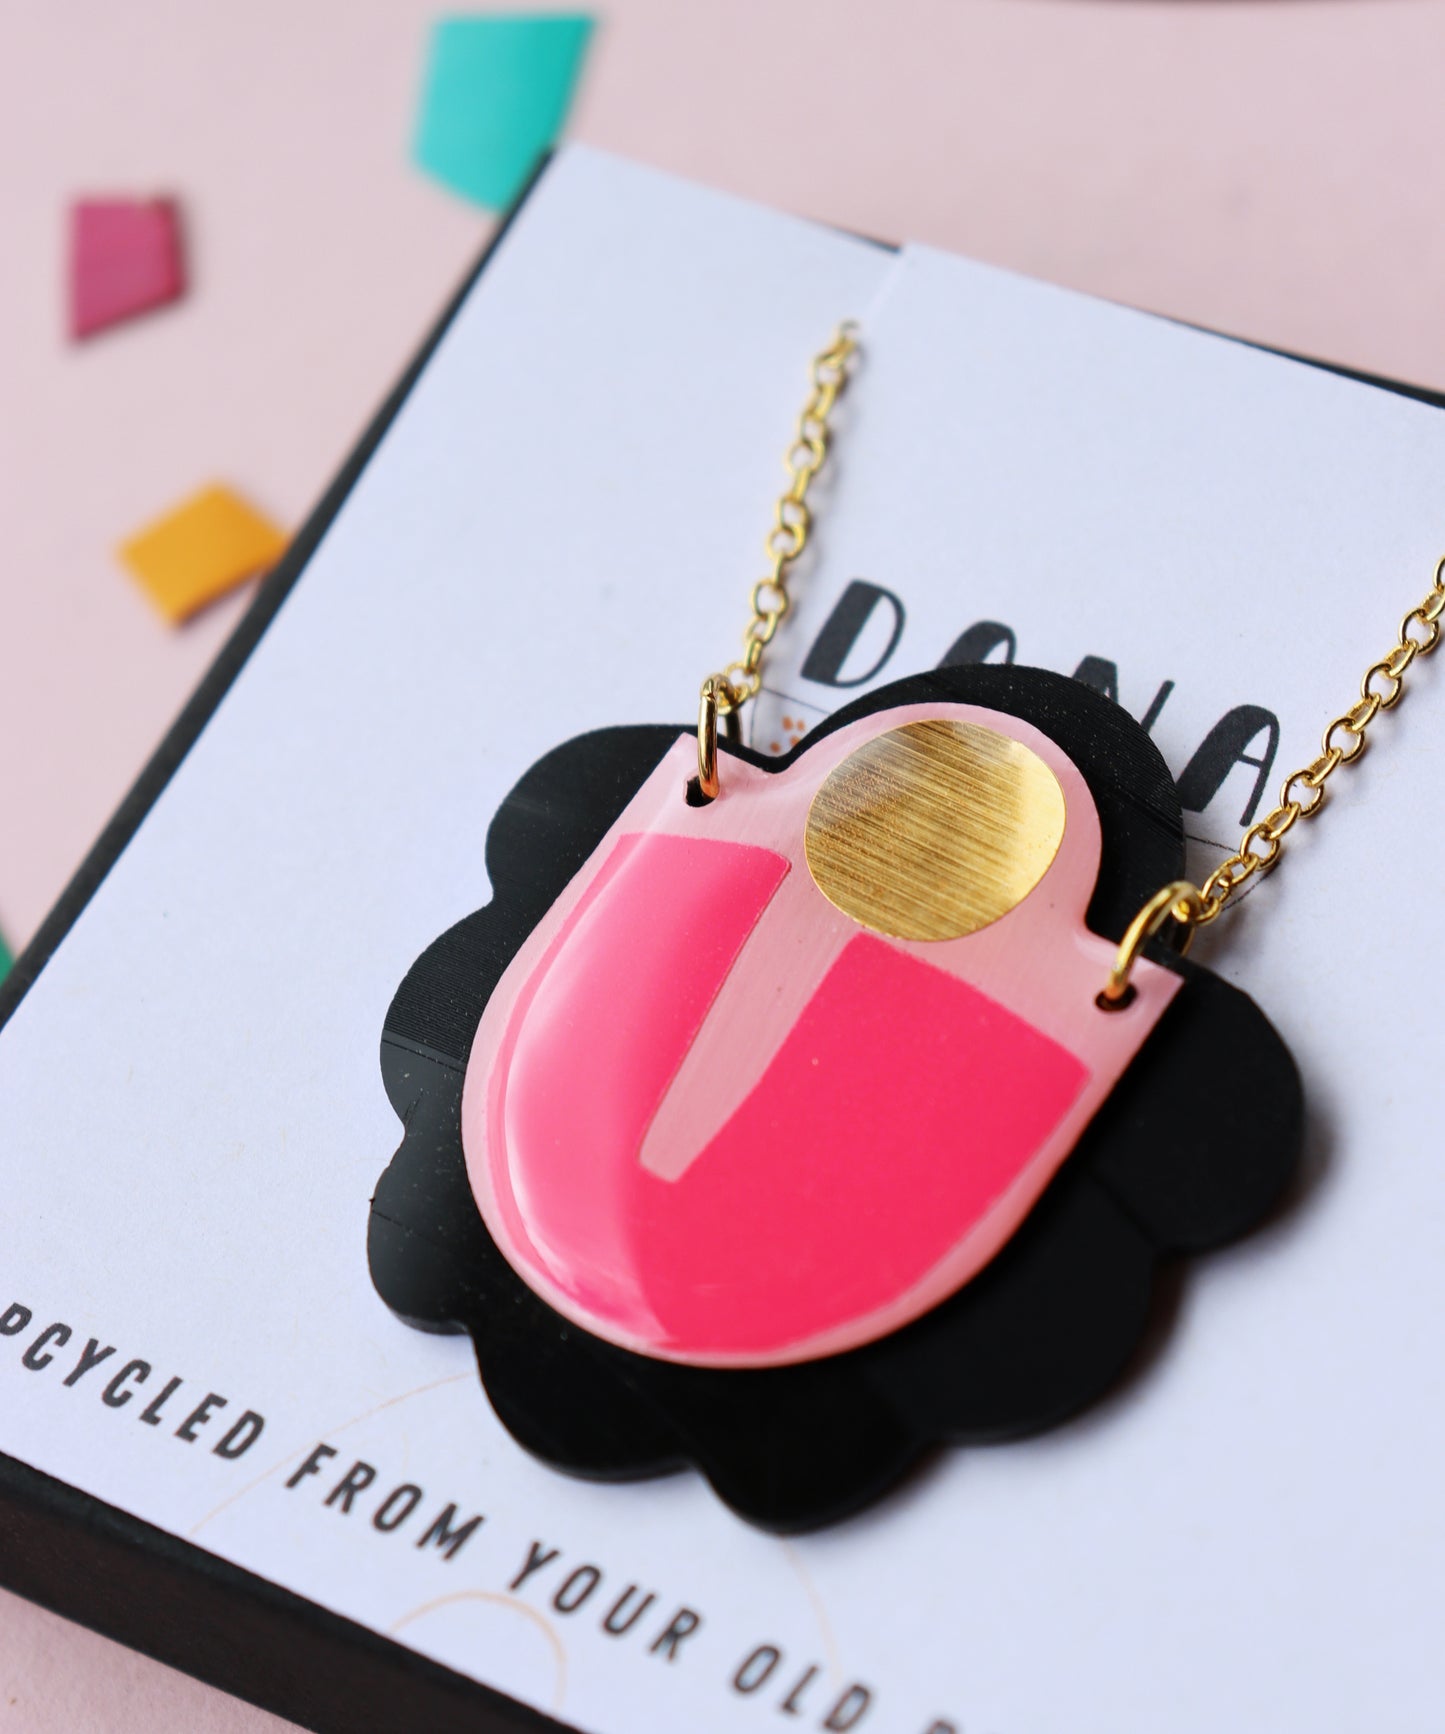 30% OFF FROUFROU necklace in hot pink, gold and black / two left